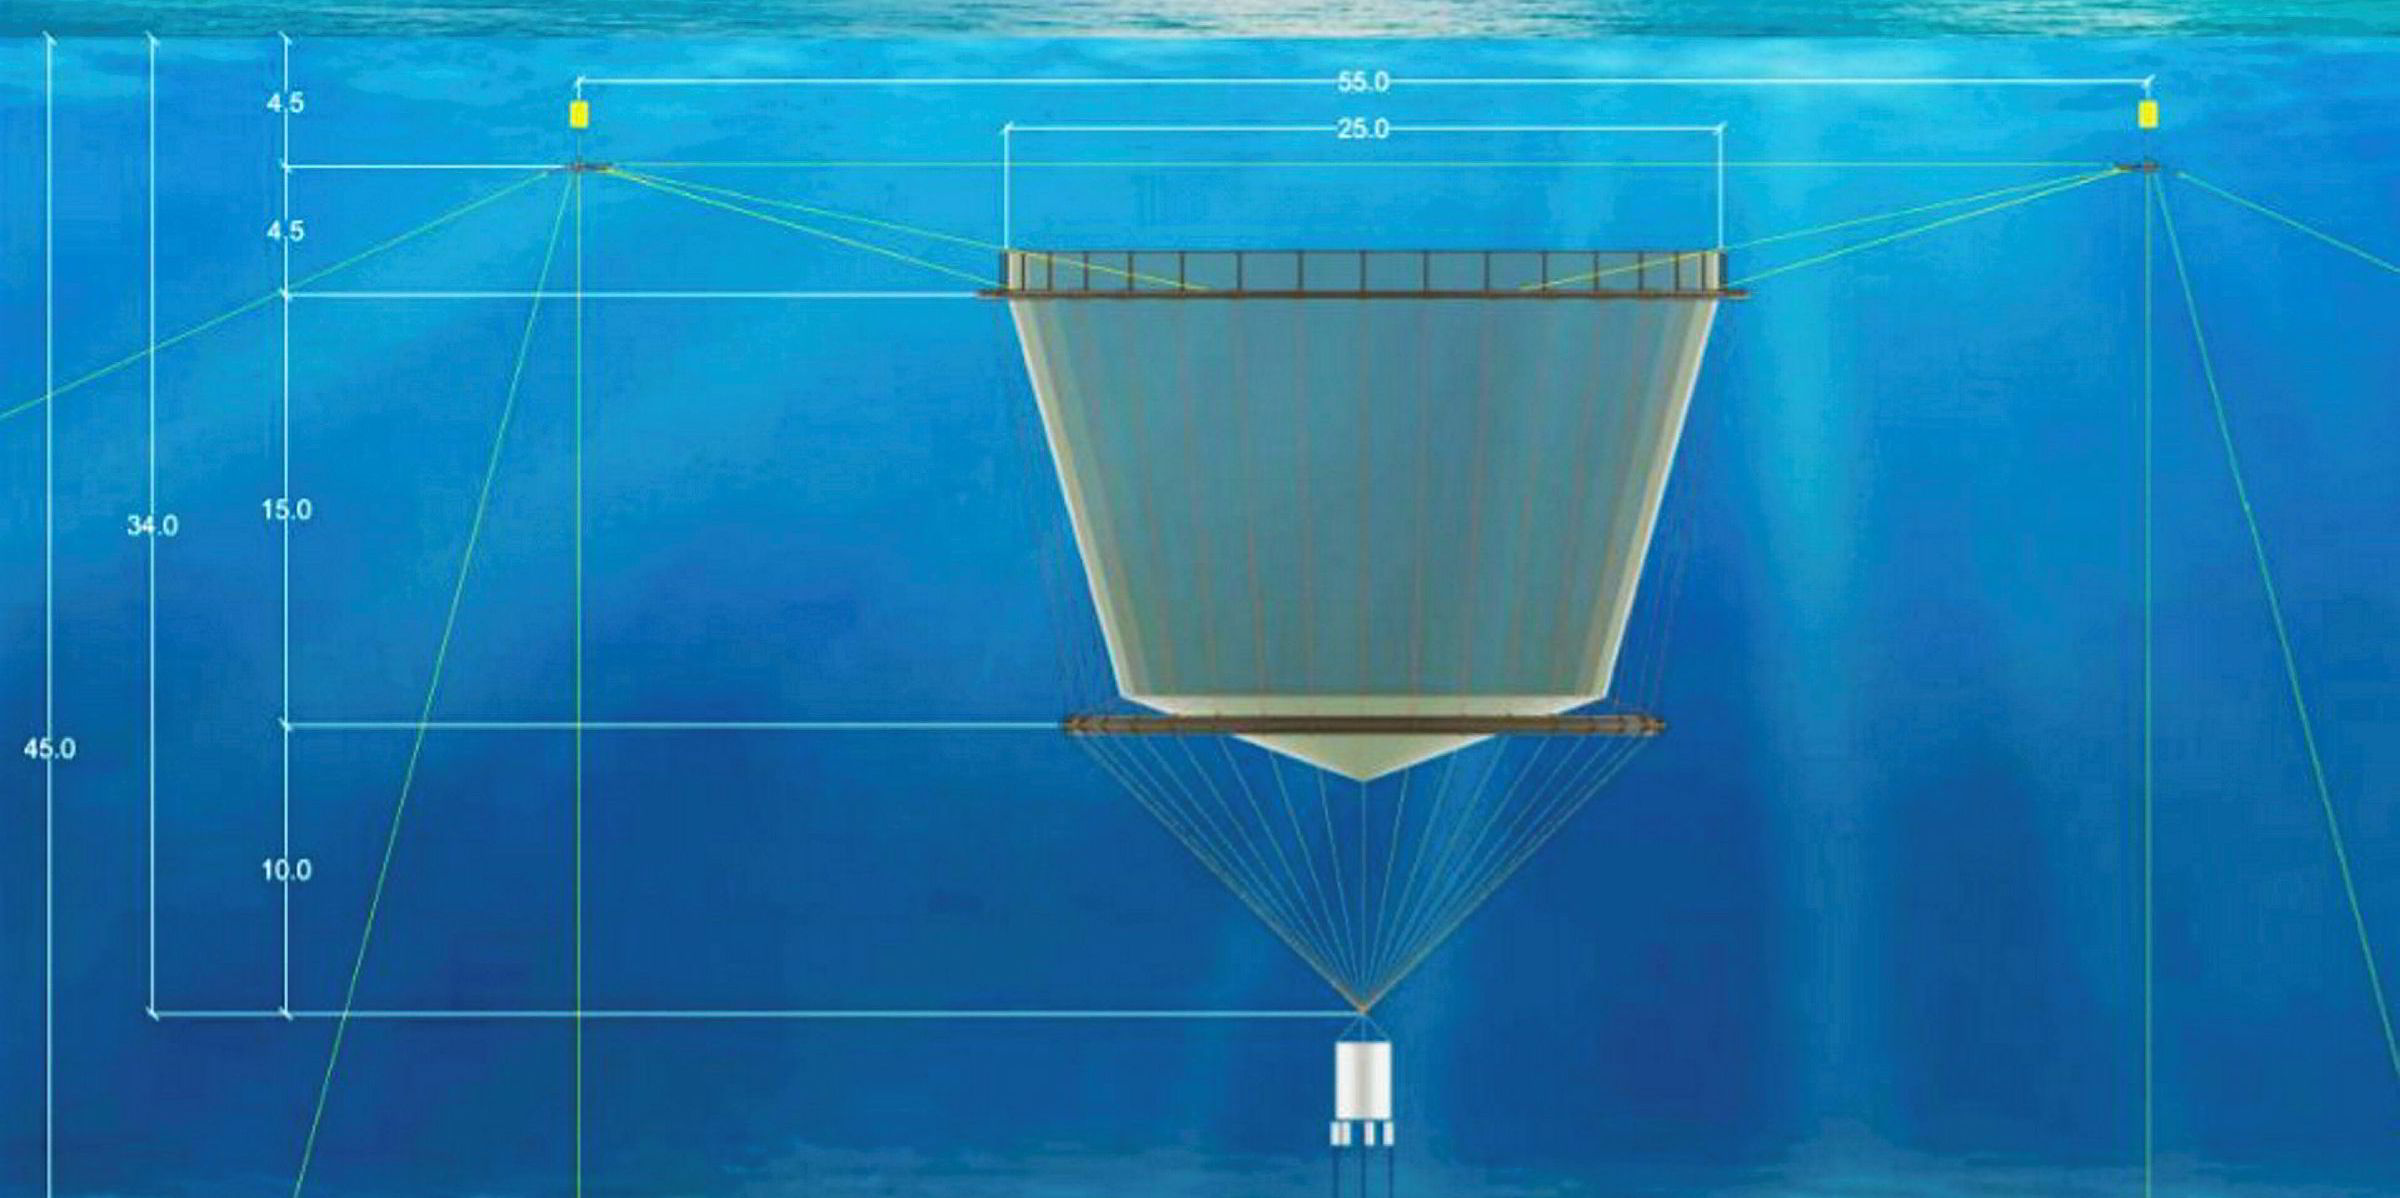 Are submersible cages the key to boosting Finland's aquaculture